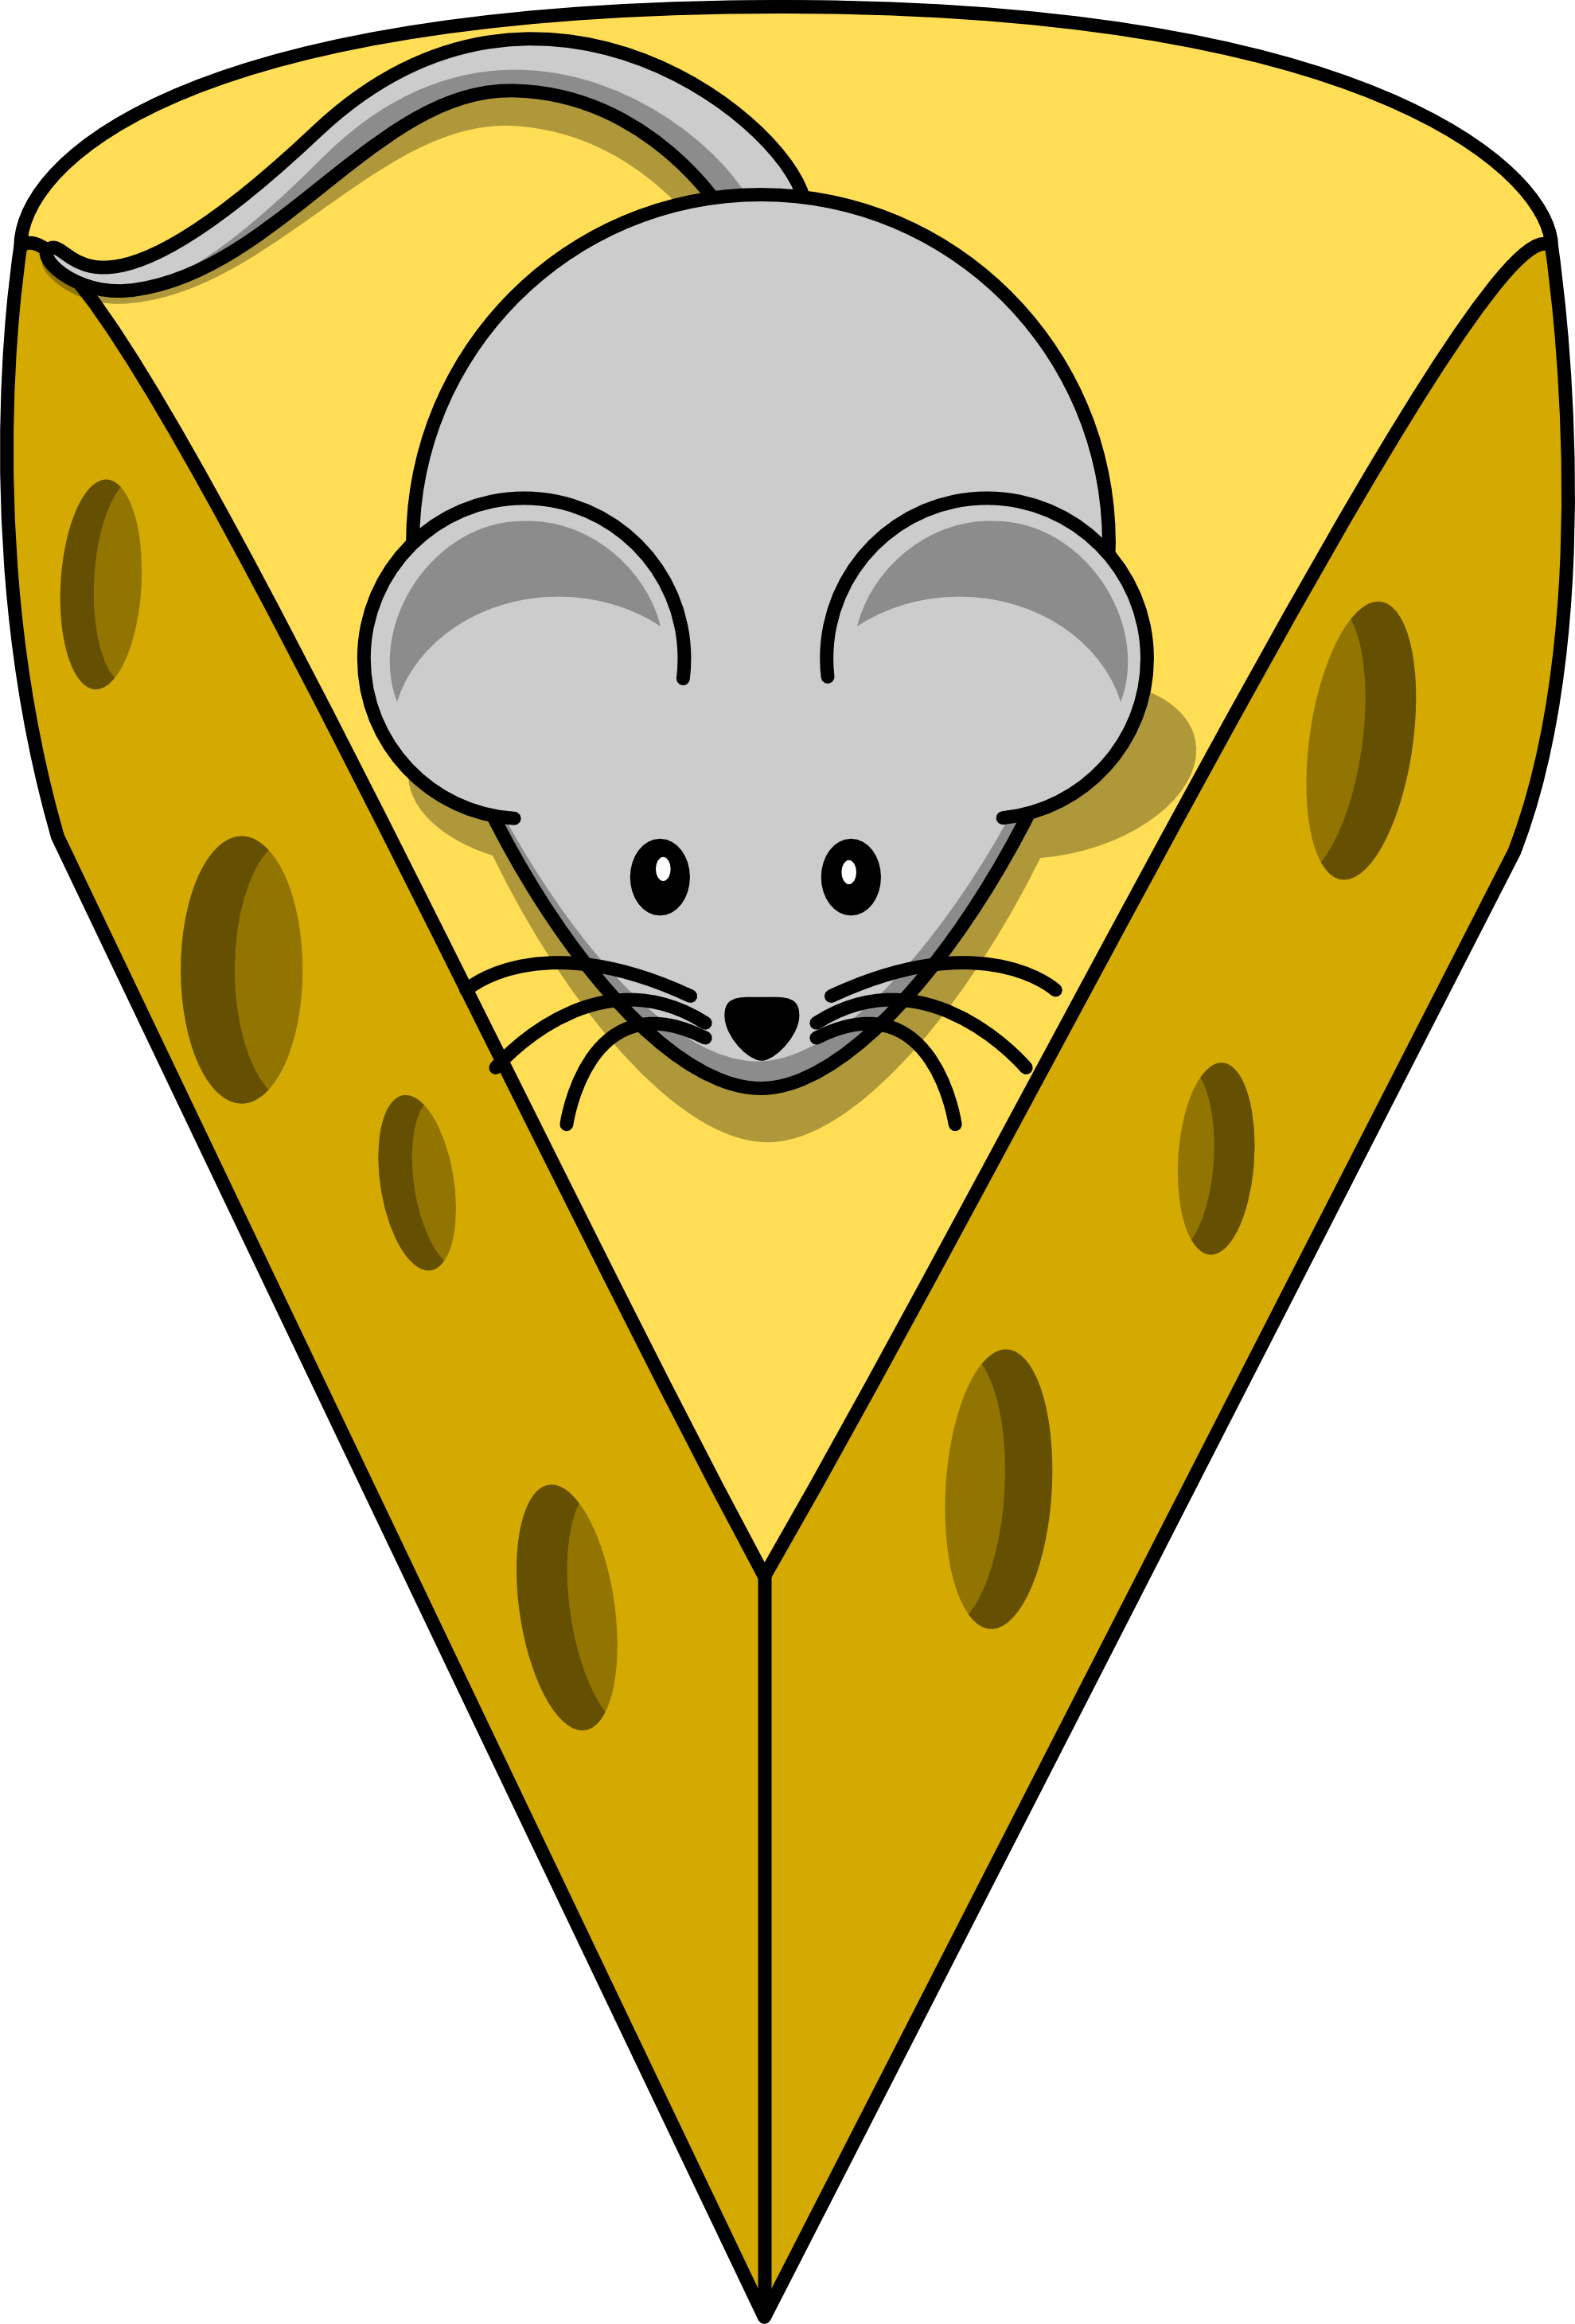 Mouse panda free images. Clipart rat cheese